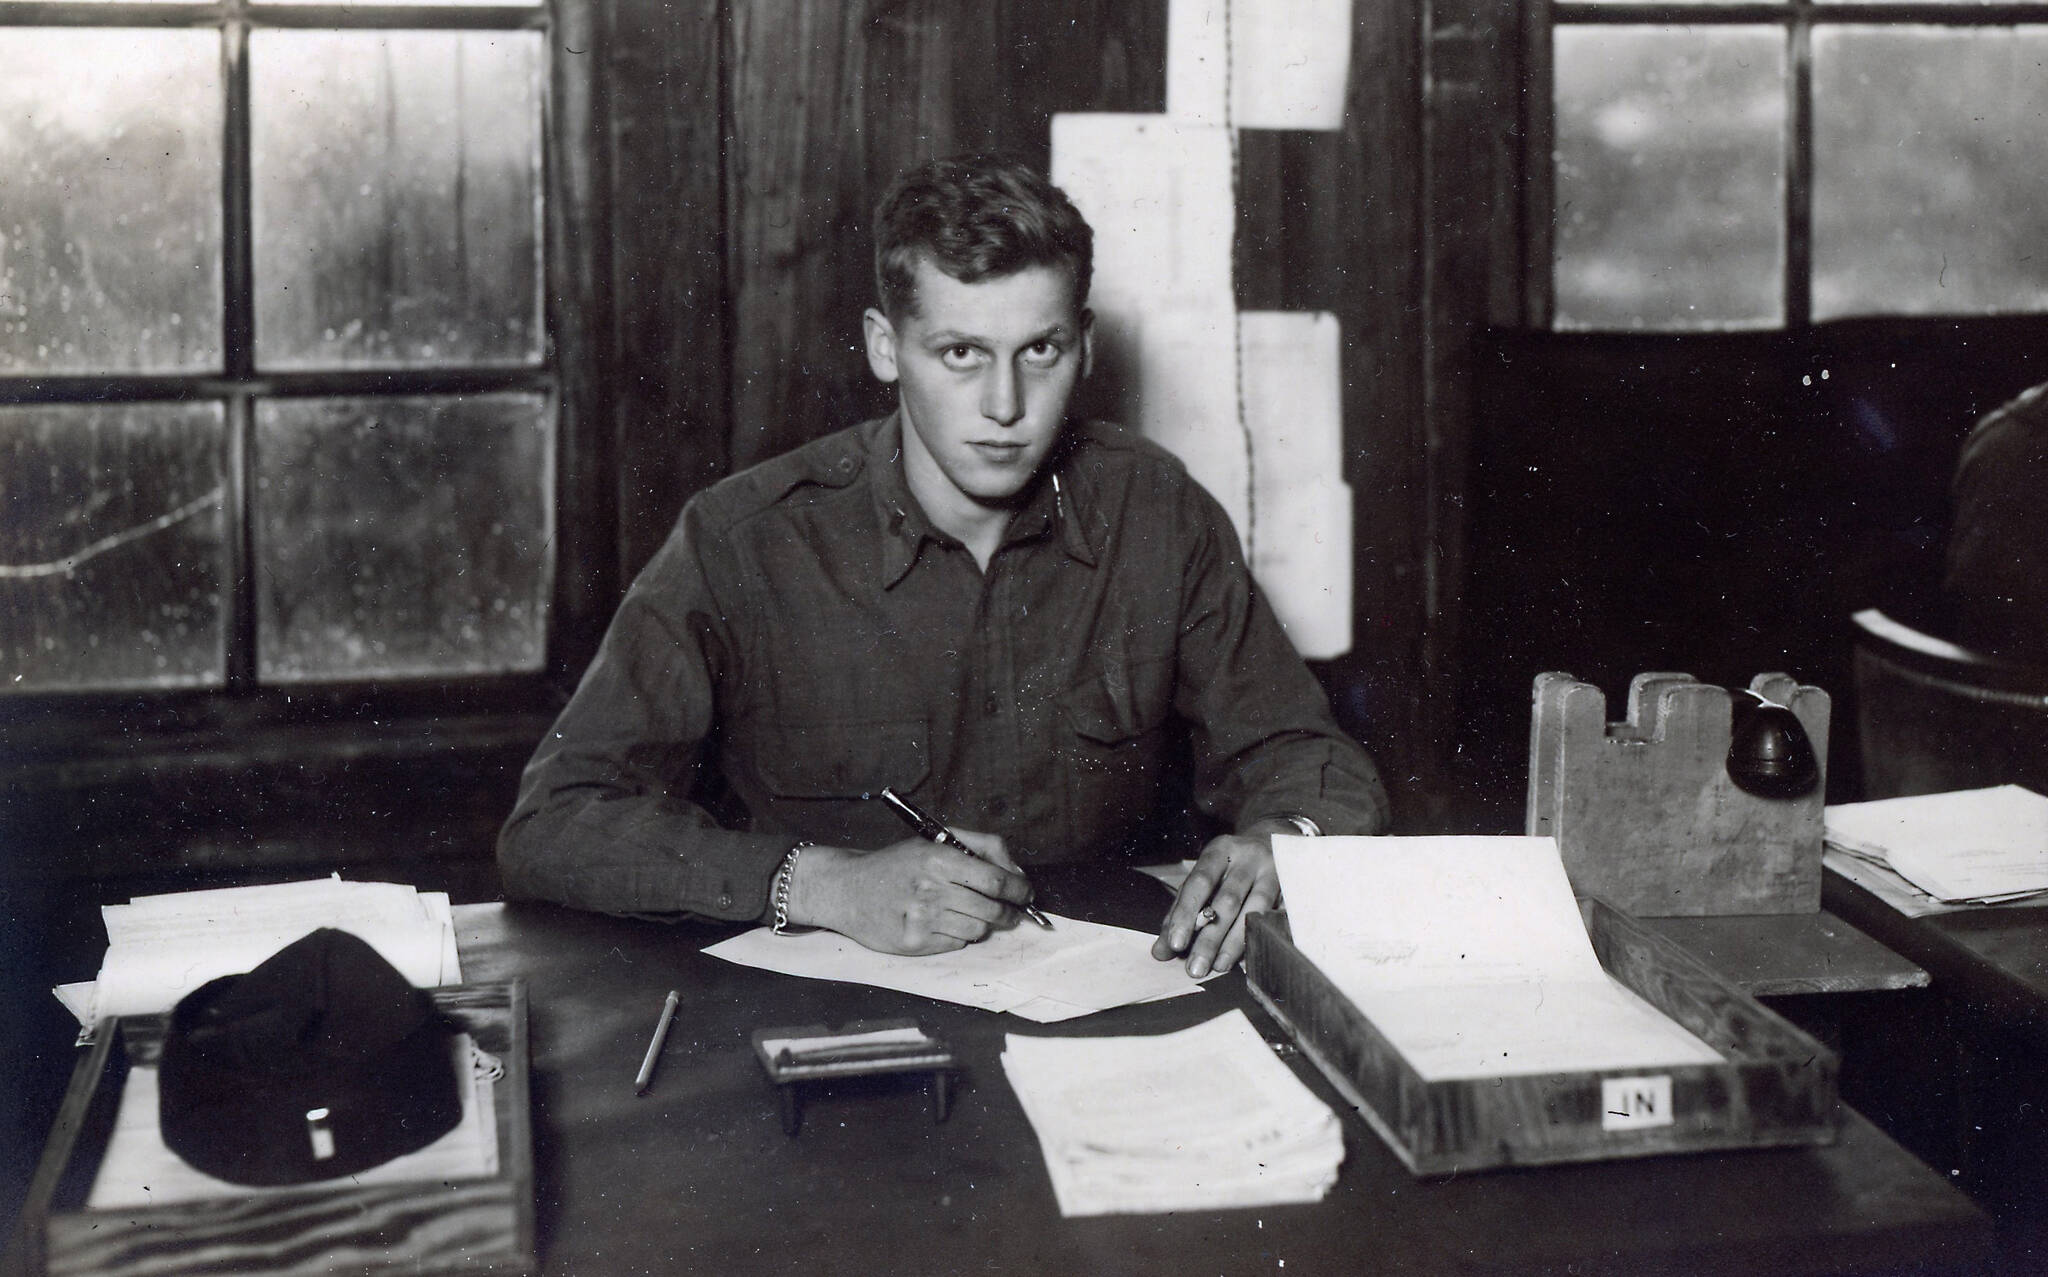 John Fenger, seen here performing office work in about 1944-45, served as a first lieutenant during World War II. (Photo courtesy of the Fenger Family Collection)